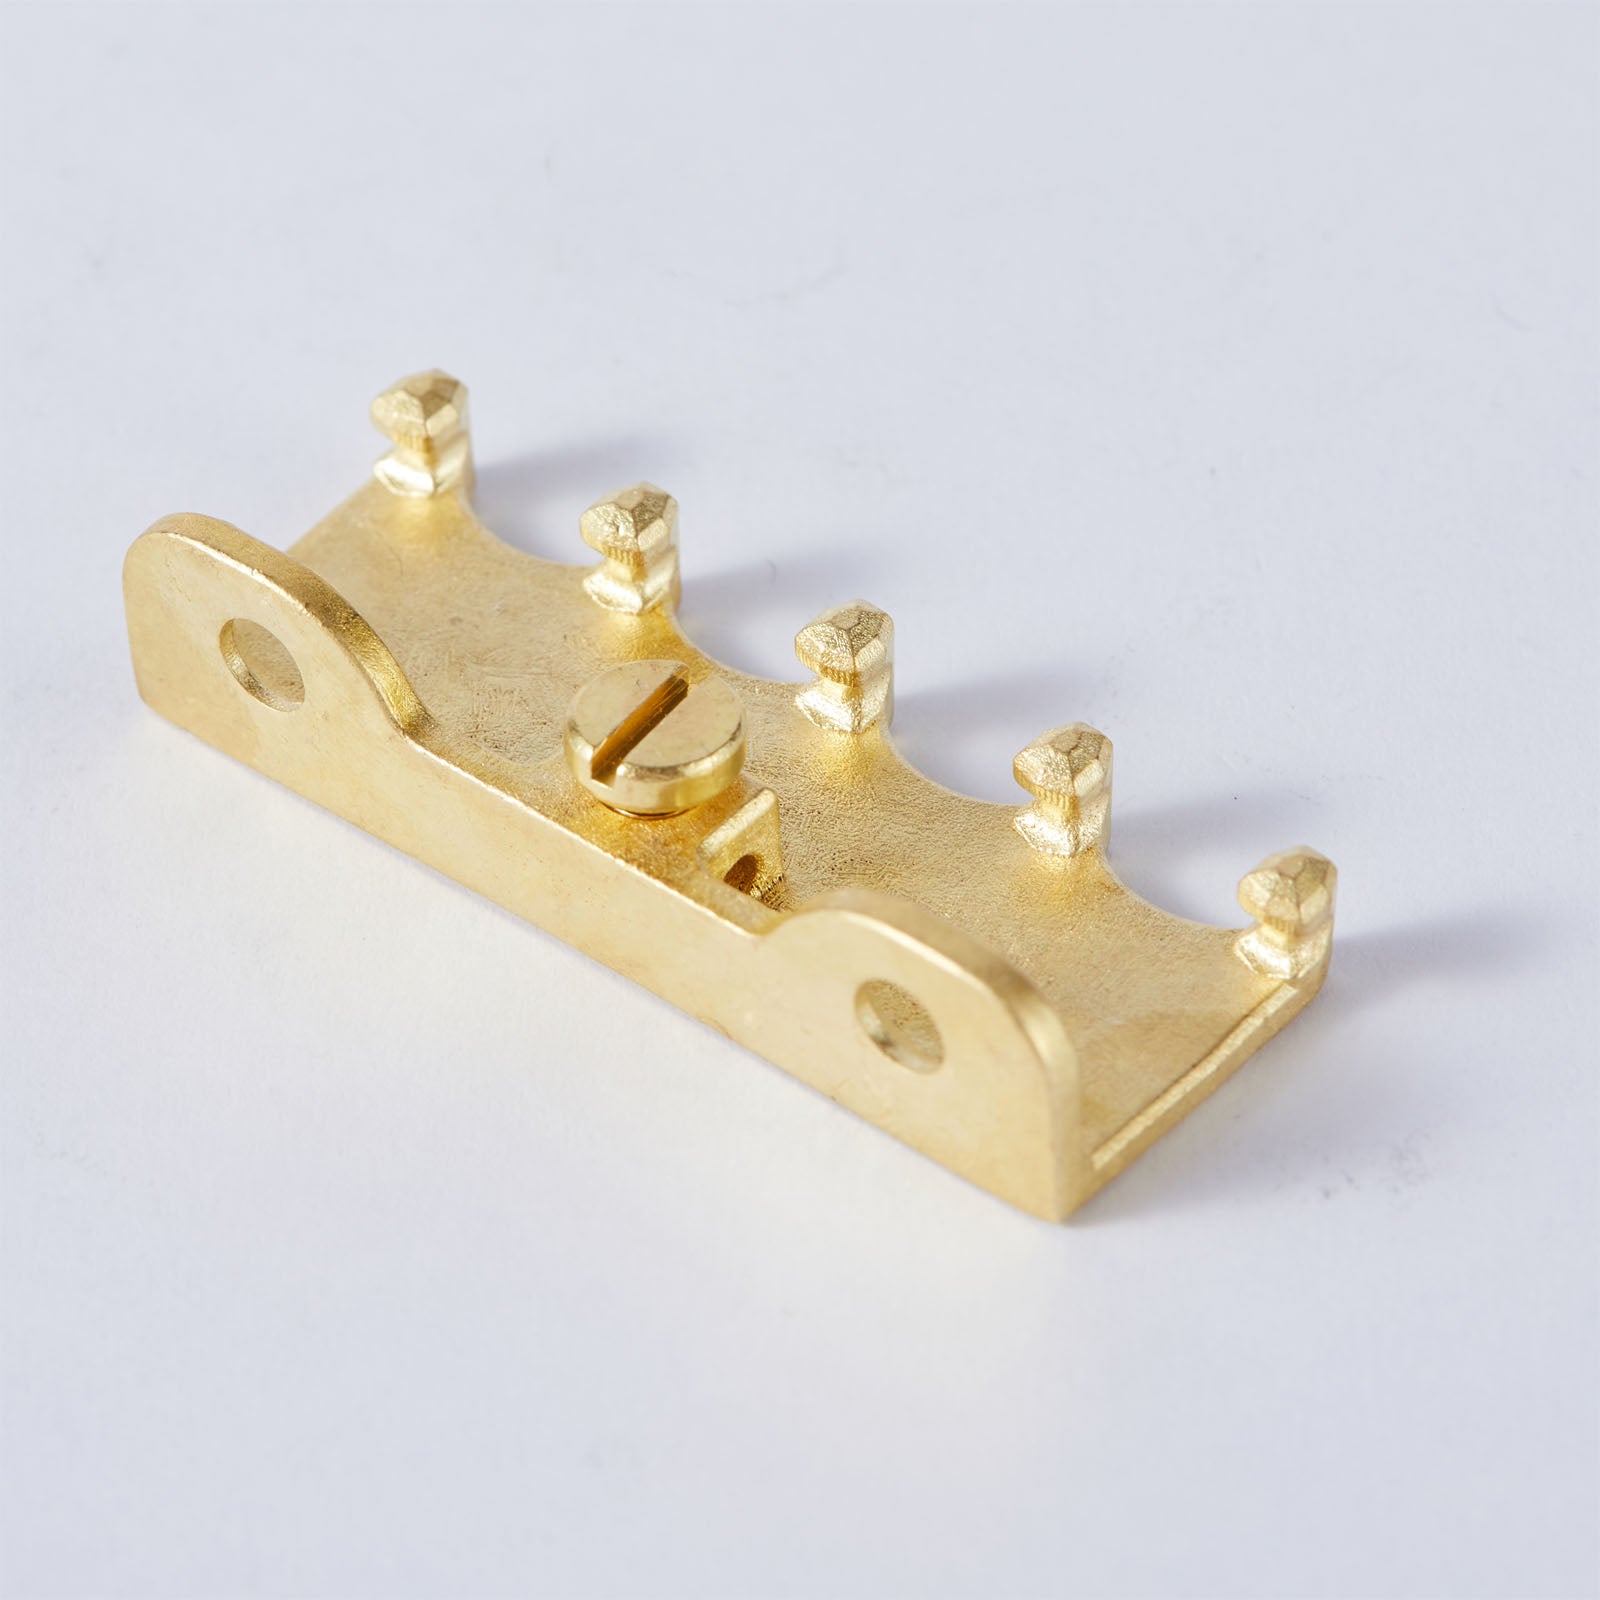 Electric Guitar Tremolo Bridge Spring Claw Full Solid Brass Hook With Screw